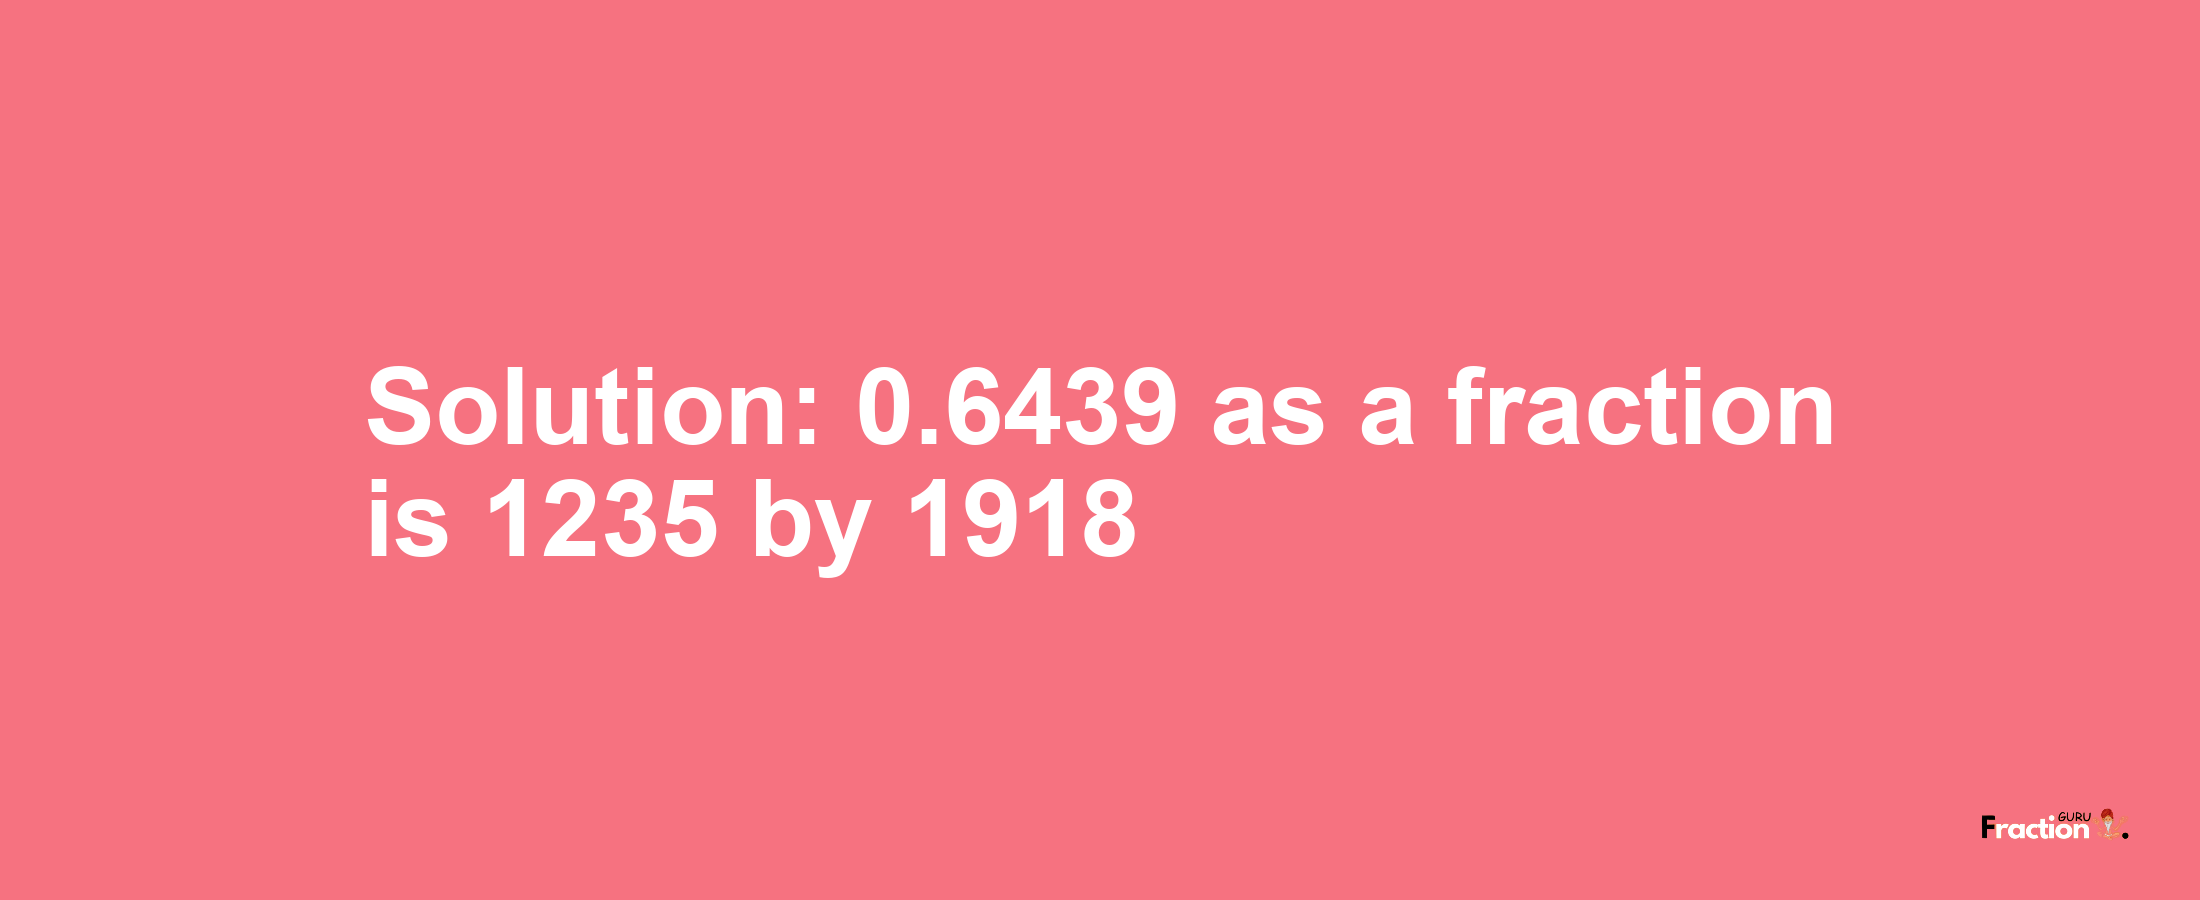 Solution:0.6439 as a fraction is 1235/1918